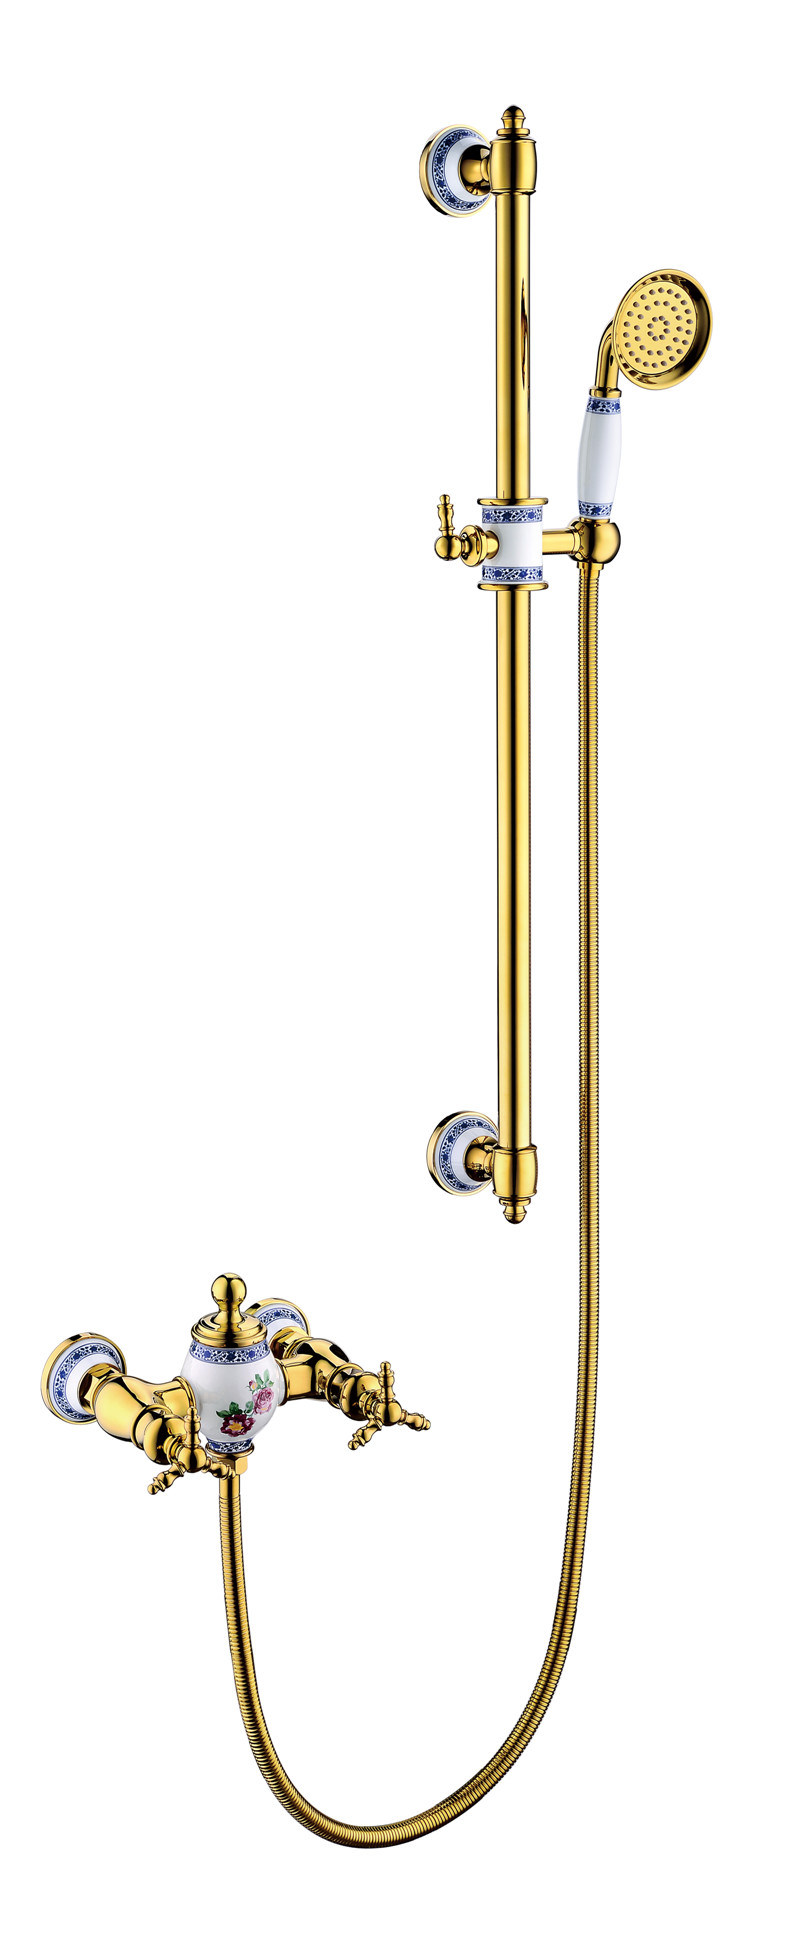 New Design Chinese Blue-and-White Ceramic Double Handle Zf-605 Brass Rain Shower Set